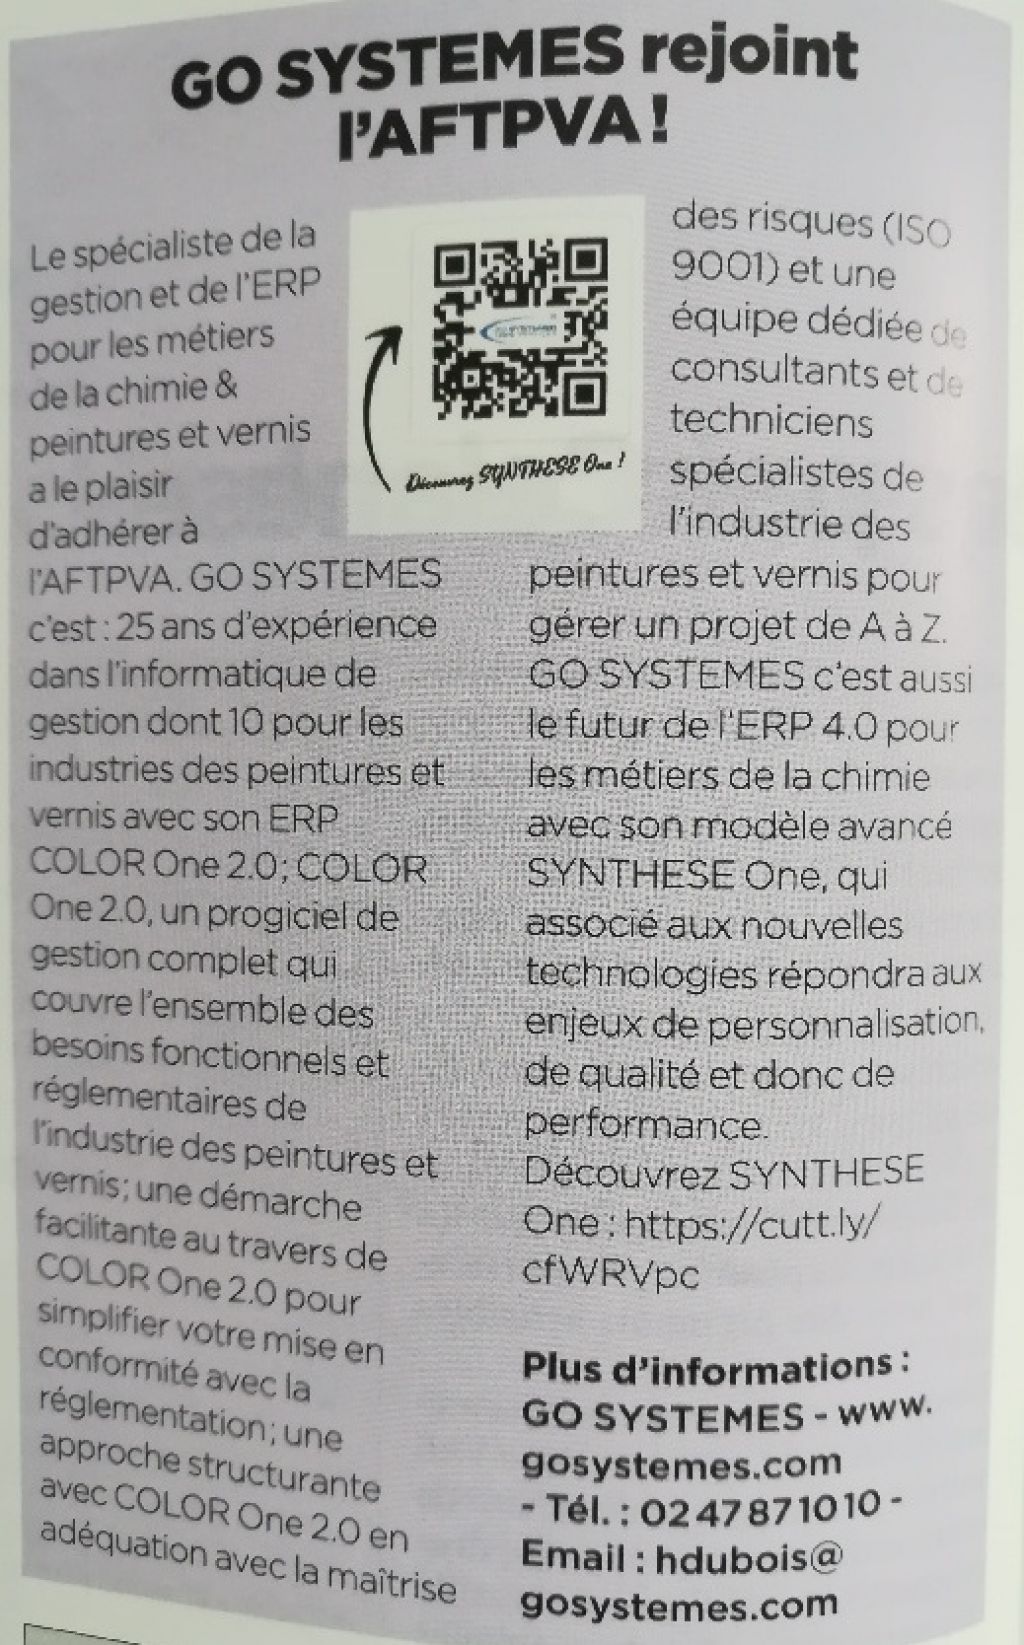 Go-Systemes-rejoint-AFTPVA